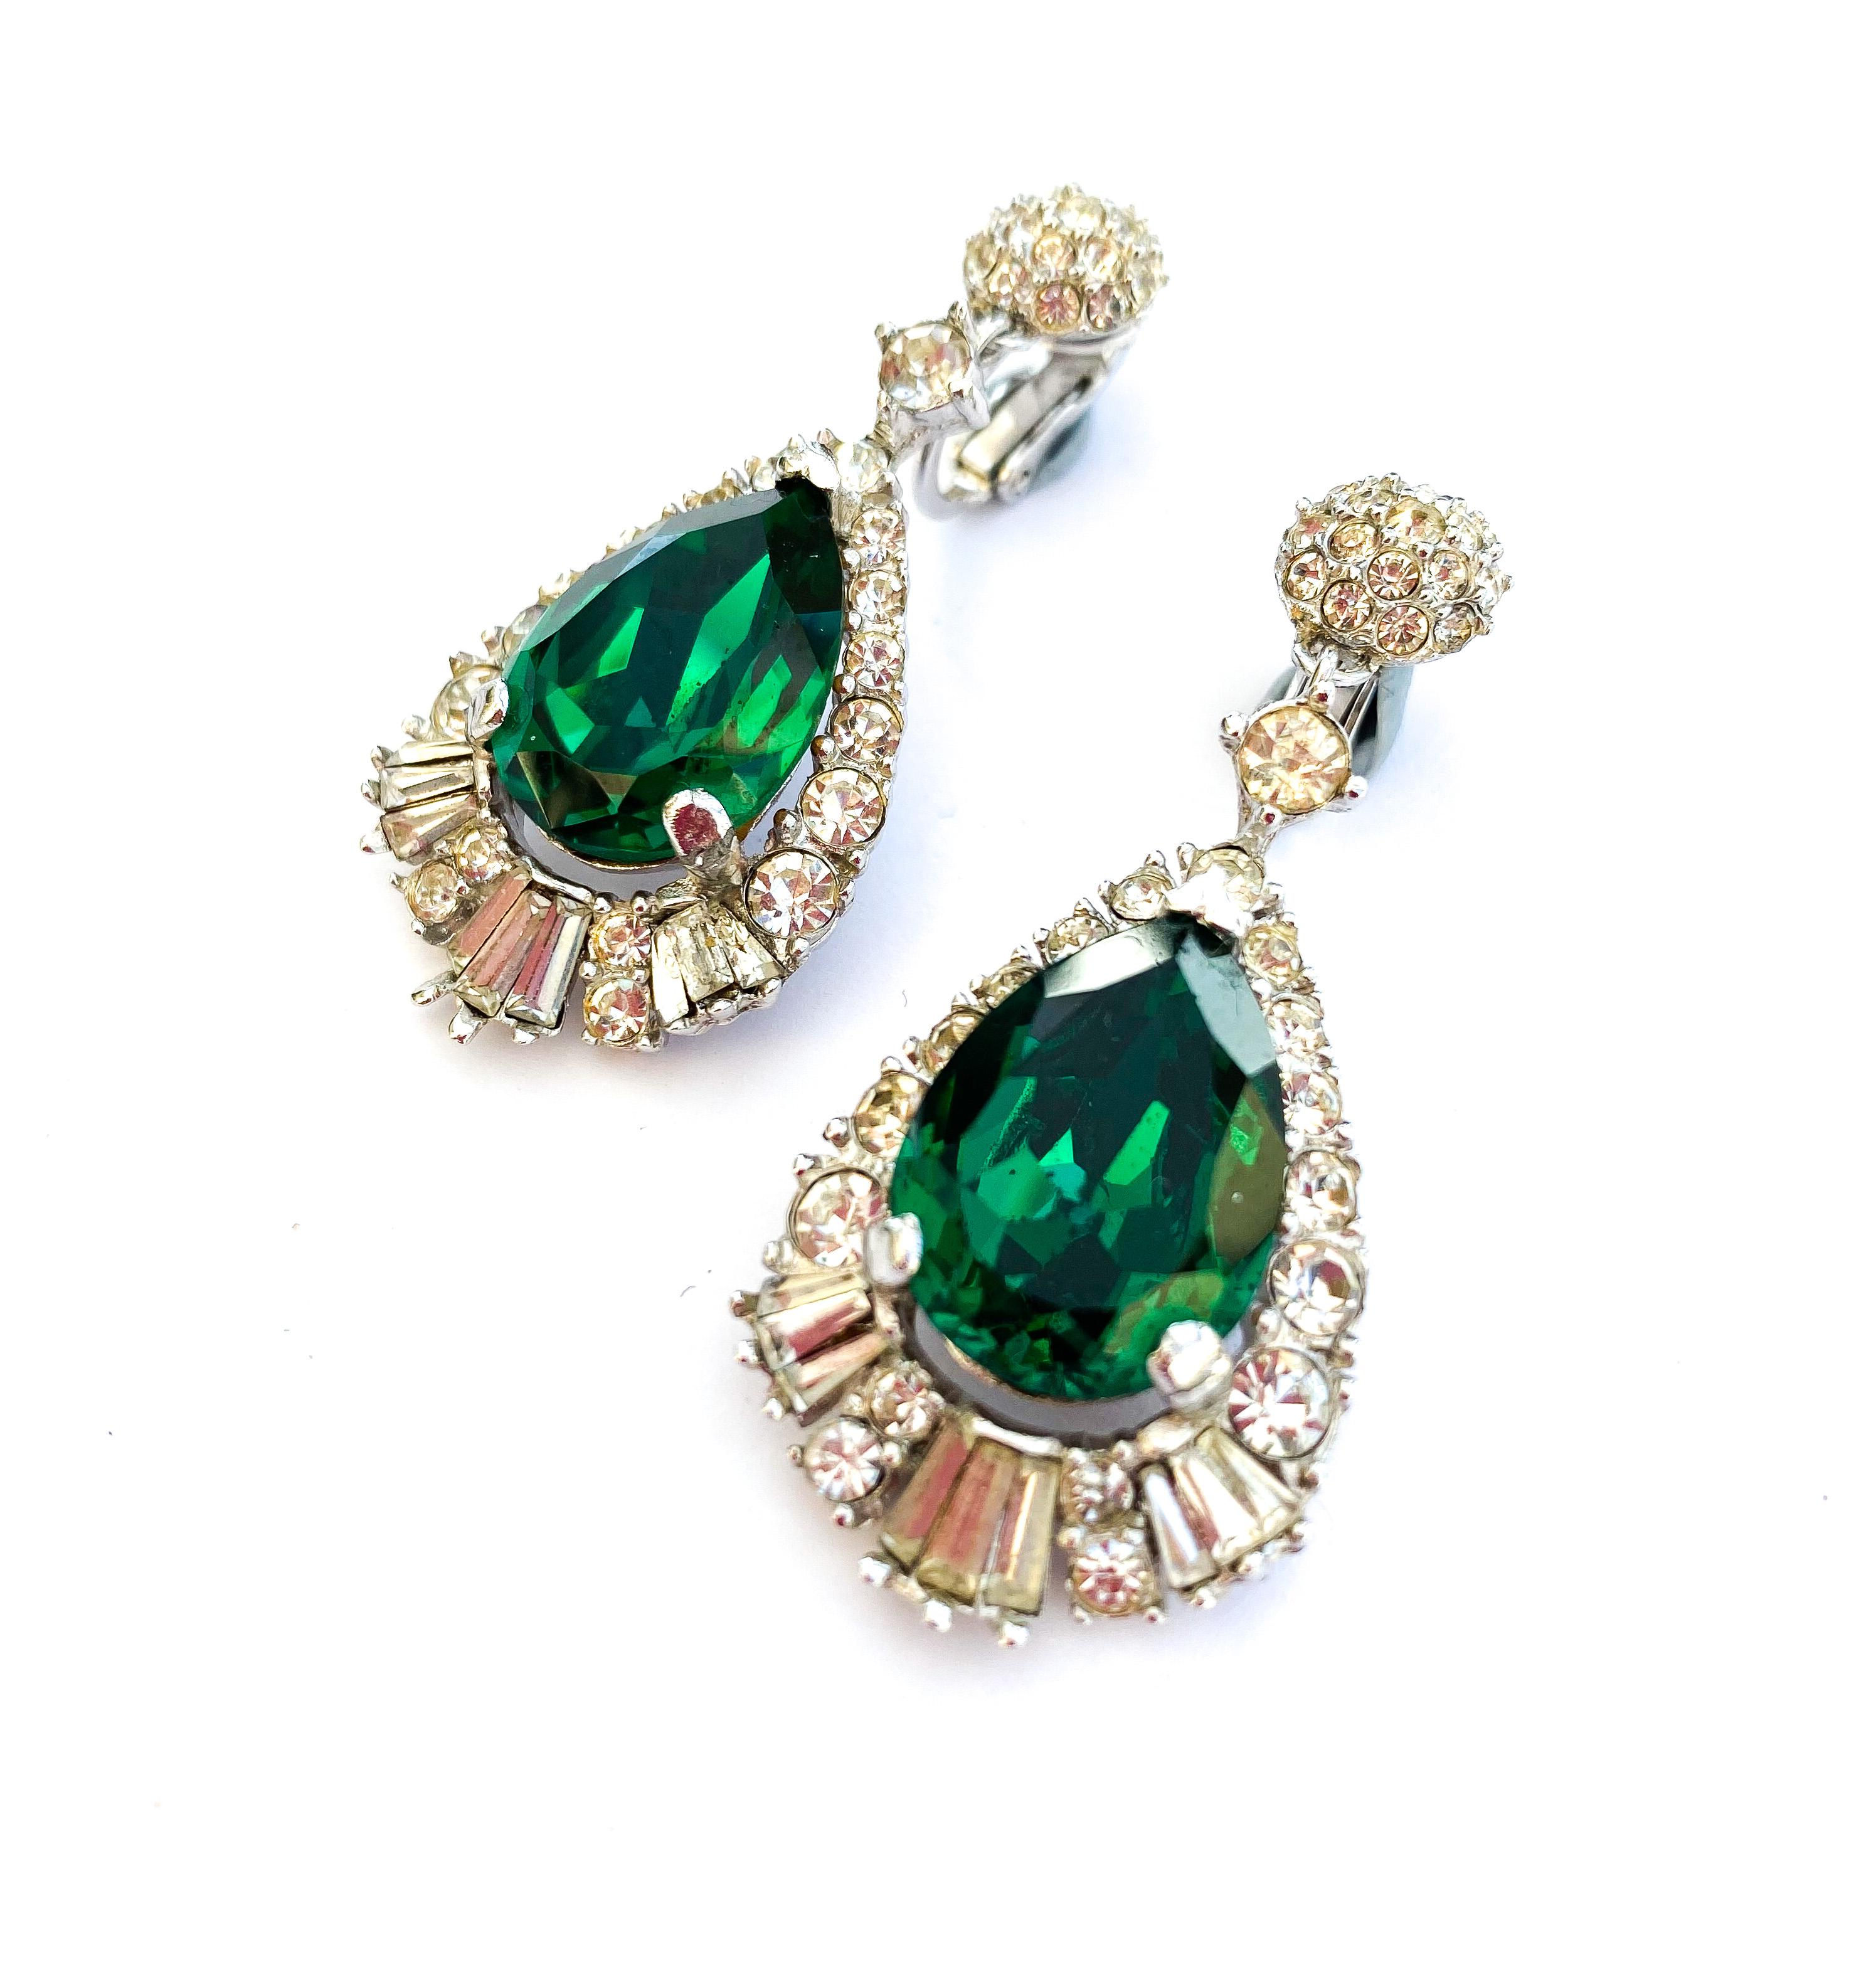 A pair of beautiful clear paste and faux emerald drop earrings by Marcel Boucher, from the 1960s. As in many of Boucher's creations, these copy real jewellery designs, reminiscent of Cartier (for whom Boucher worked) or Van Cleef and Arpels, with an